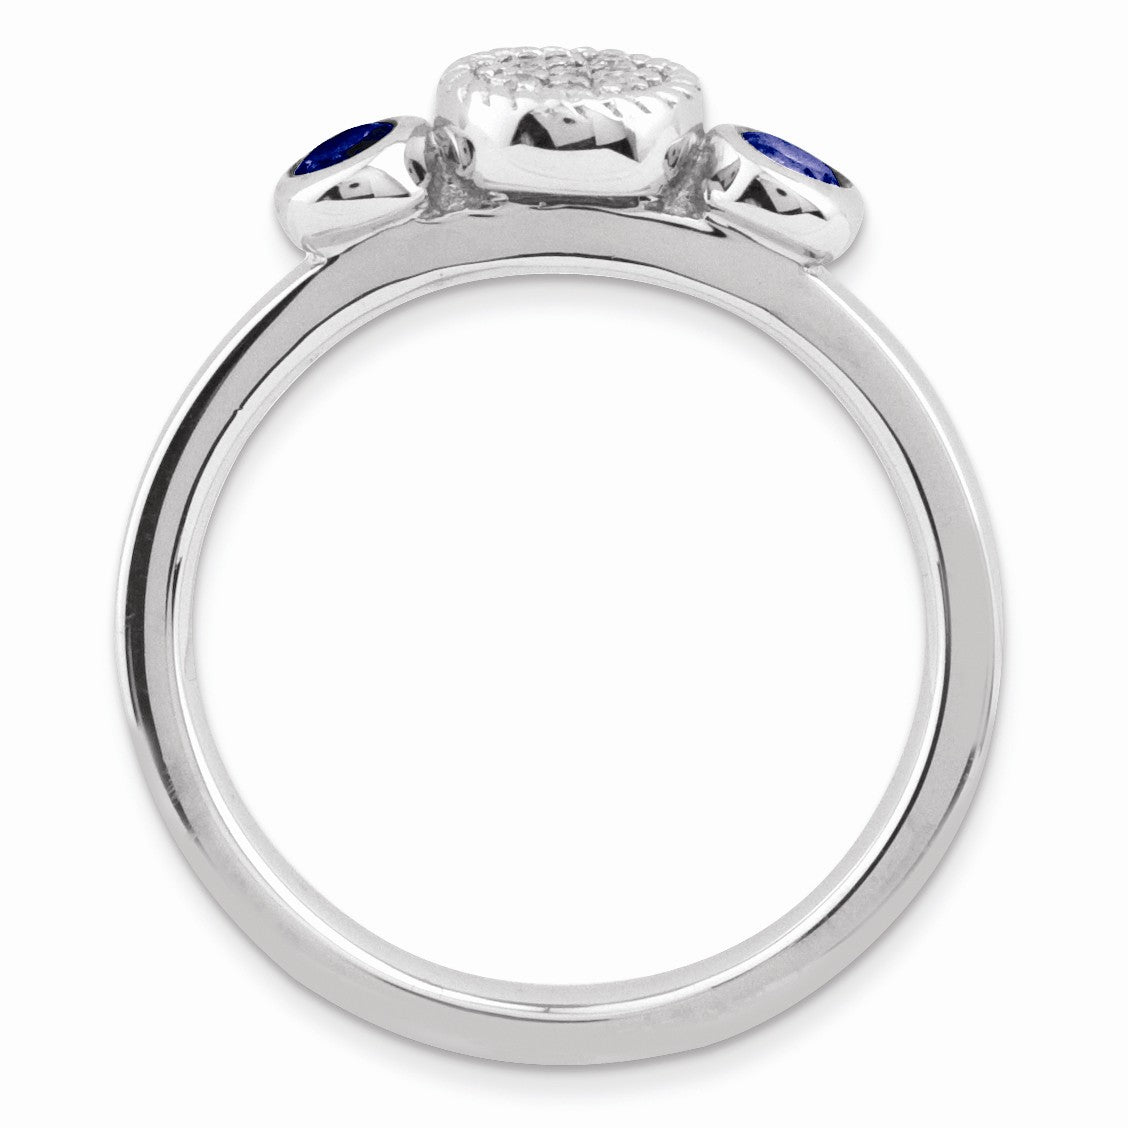 Alternate view of the Sterling Silver Stackable Created Sapphire &amp; .05Ctw HI/I3 Diamond Ring by The Black Bow Jewelry Co.